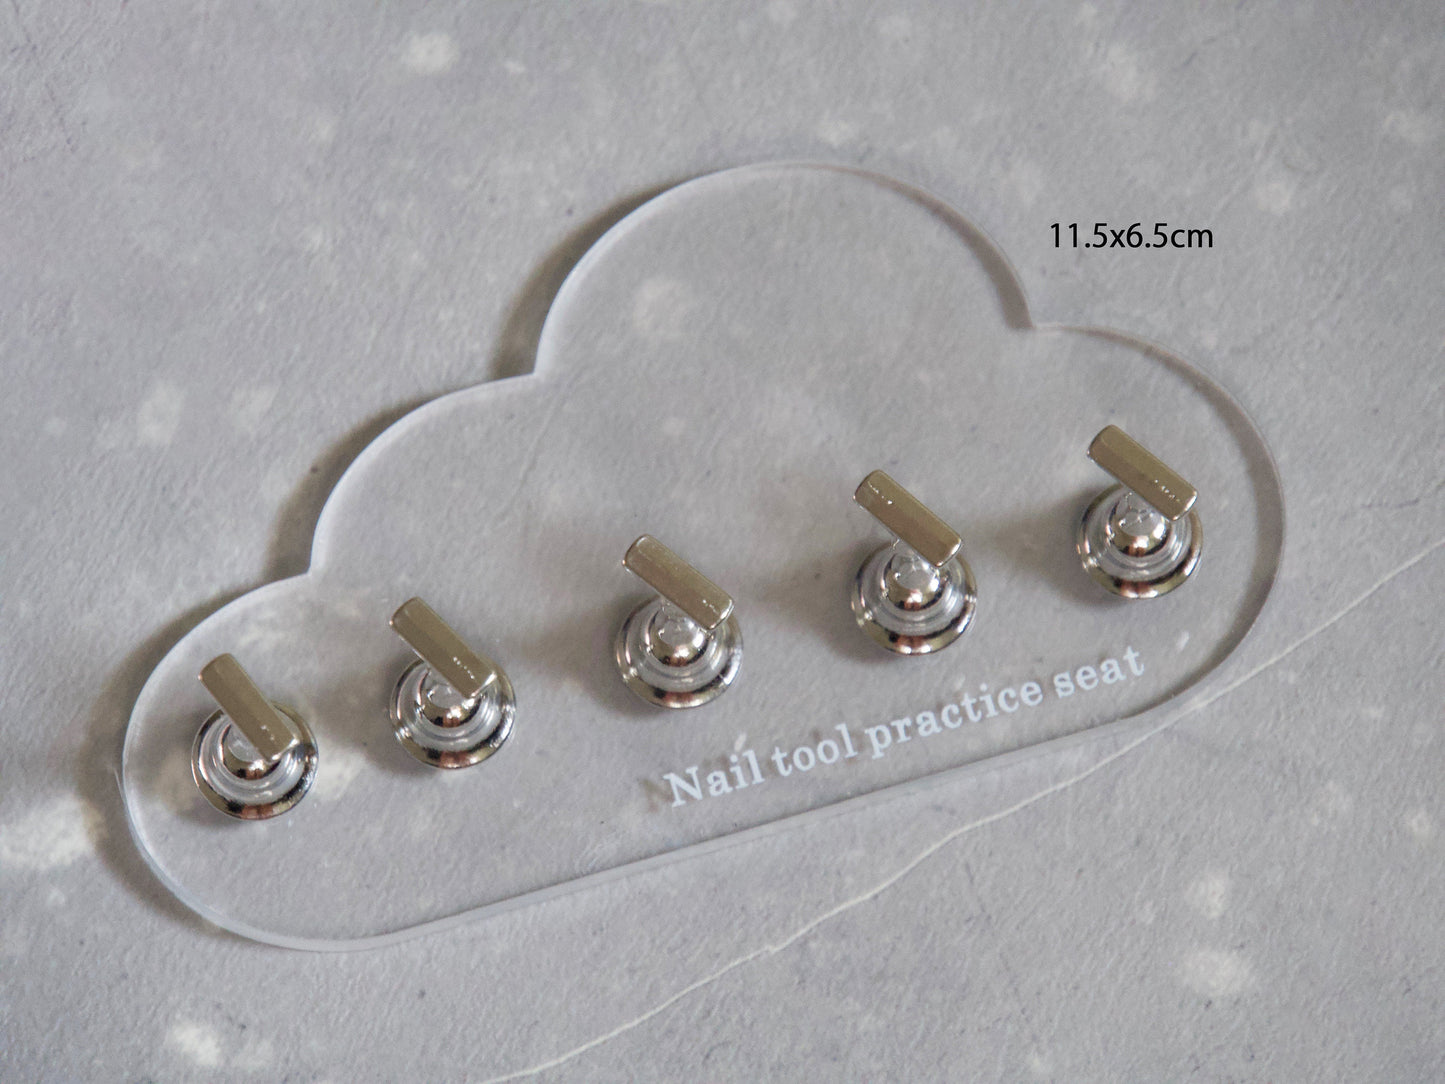 5pcs Cloud Bear Oval False Nail Display Stand Holder Set Clear Magnetic Nail Art Practice Holder/ Manicurist Press on Nail Influencer Tool